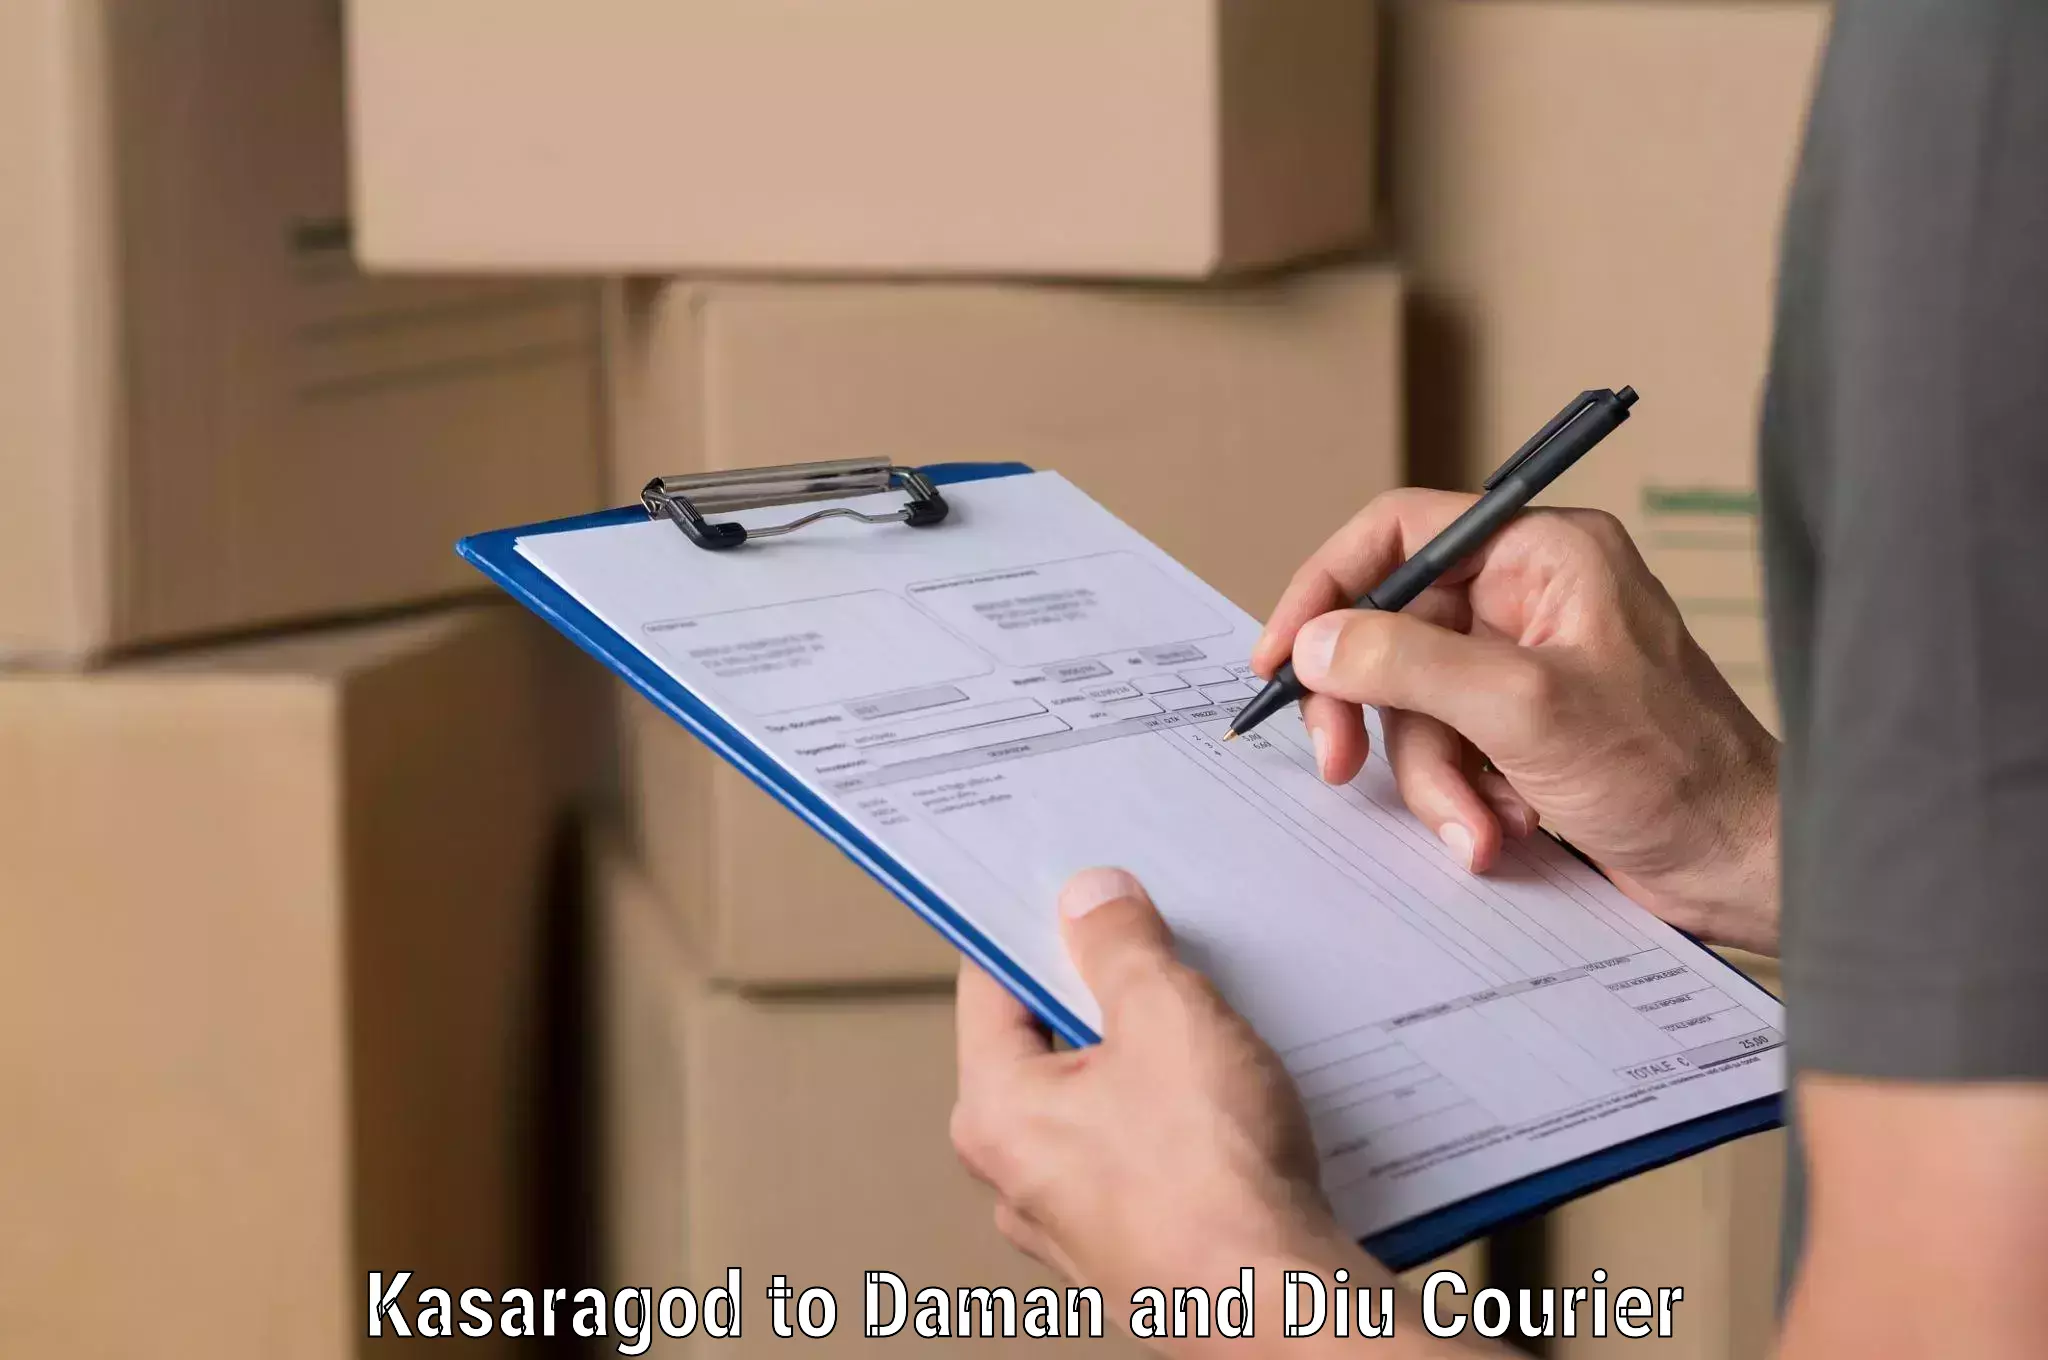 Full-service courier options Kasaragod to Daman and Diu